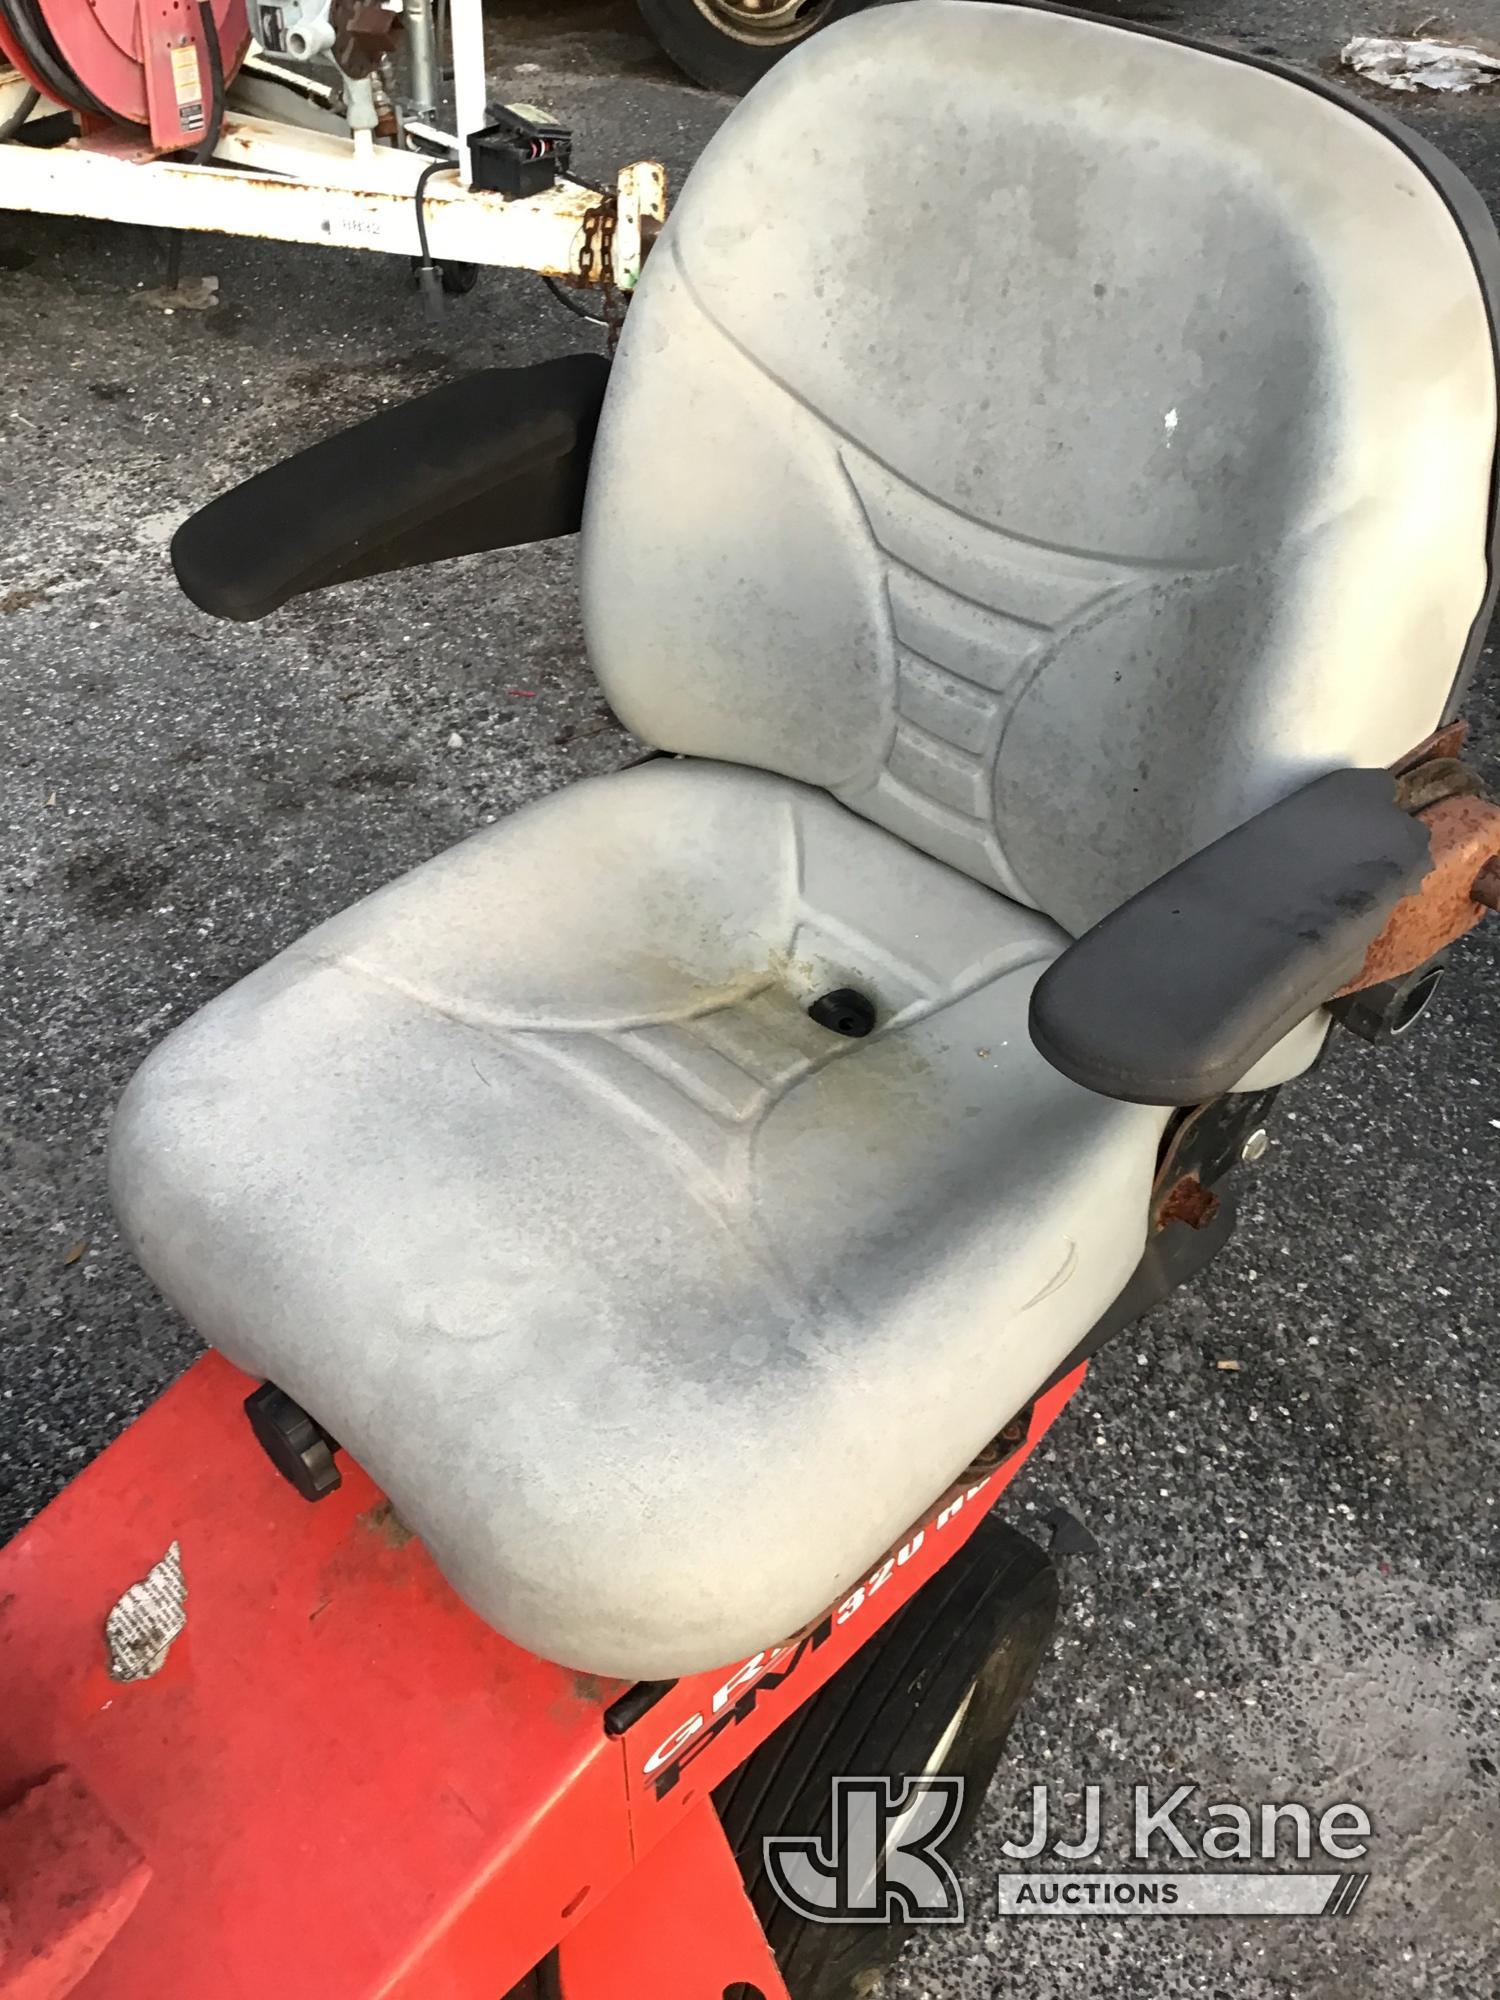 (Ocala, FL) 2013 Gravely 320 HD Riding Lawn Mower, Municipal Owned Not Running, Turns Over Will Not